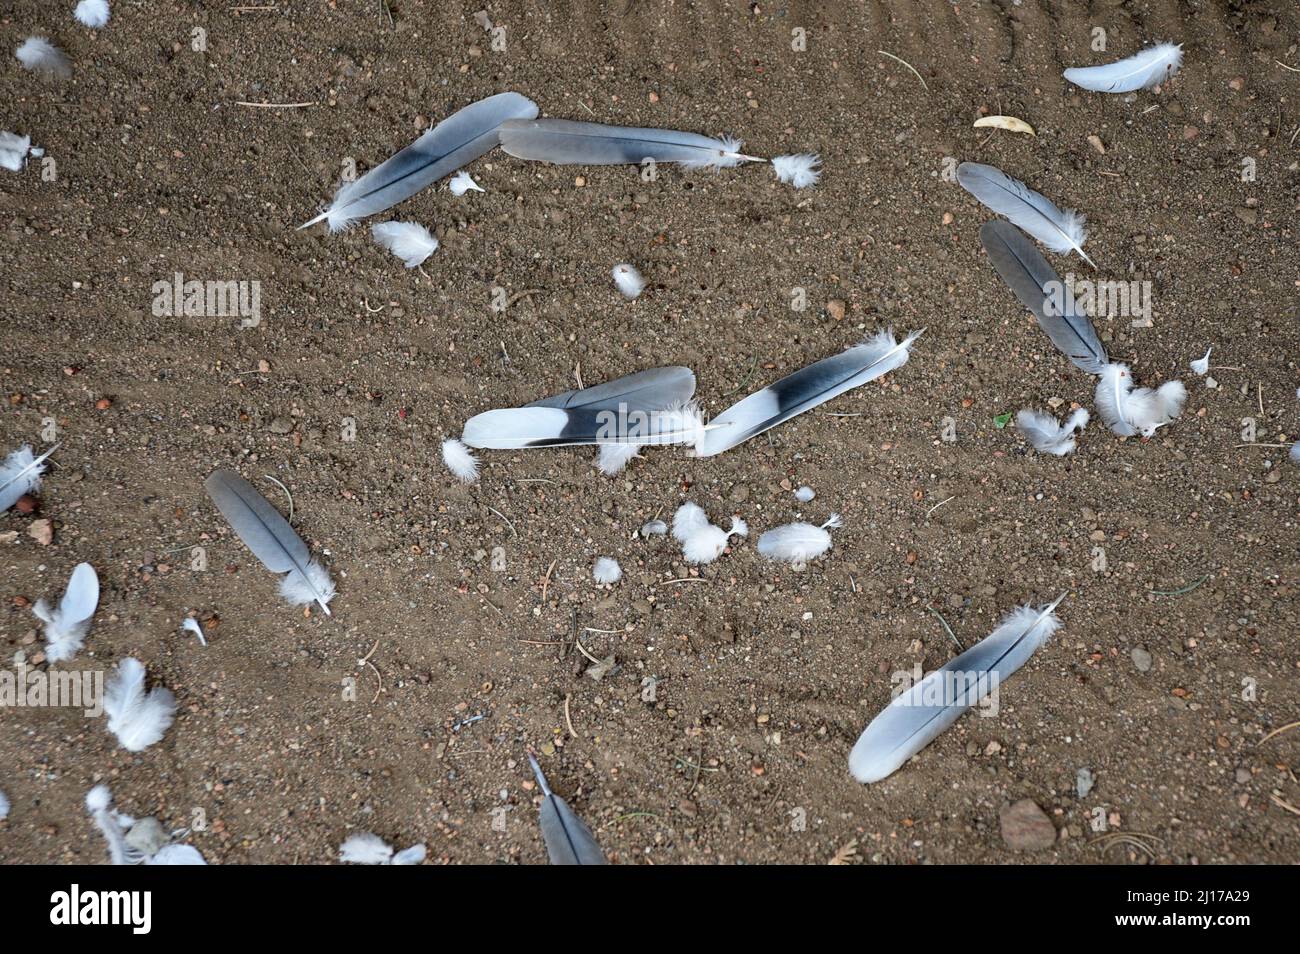 Feathers cover the ground after a bird of prey consumed a pigeon in Santa Fe, New Mexico. Stock Photo